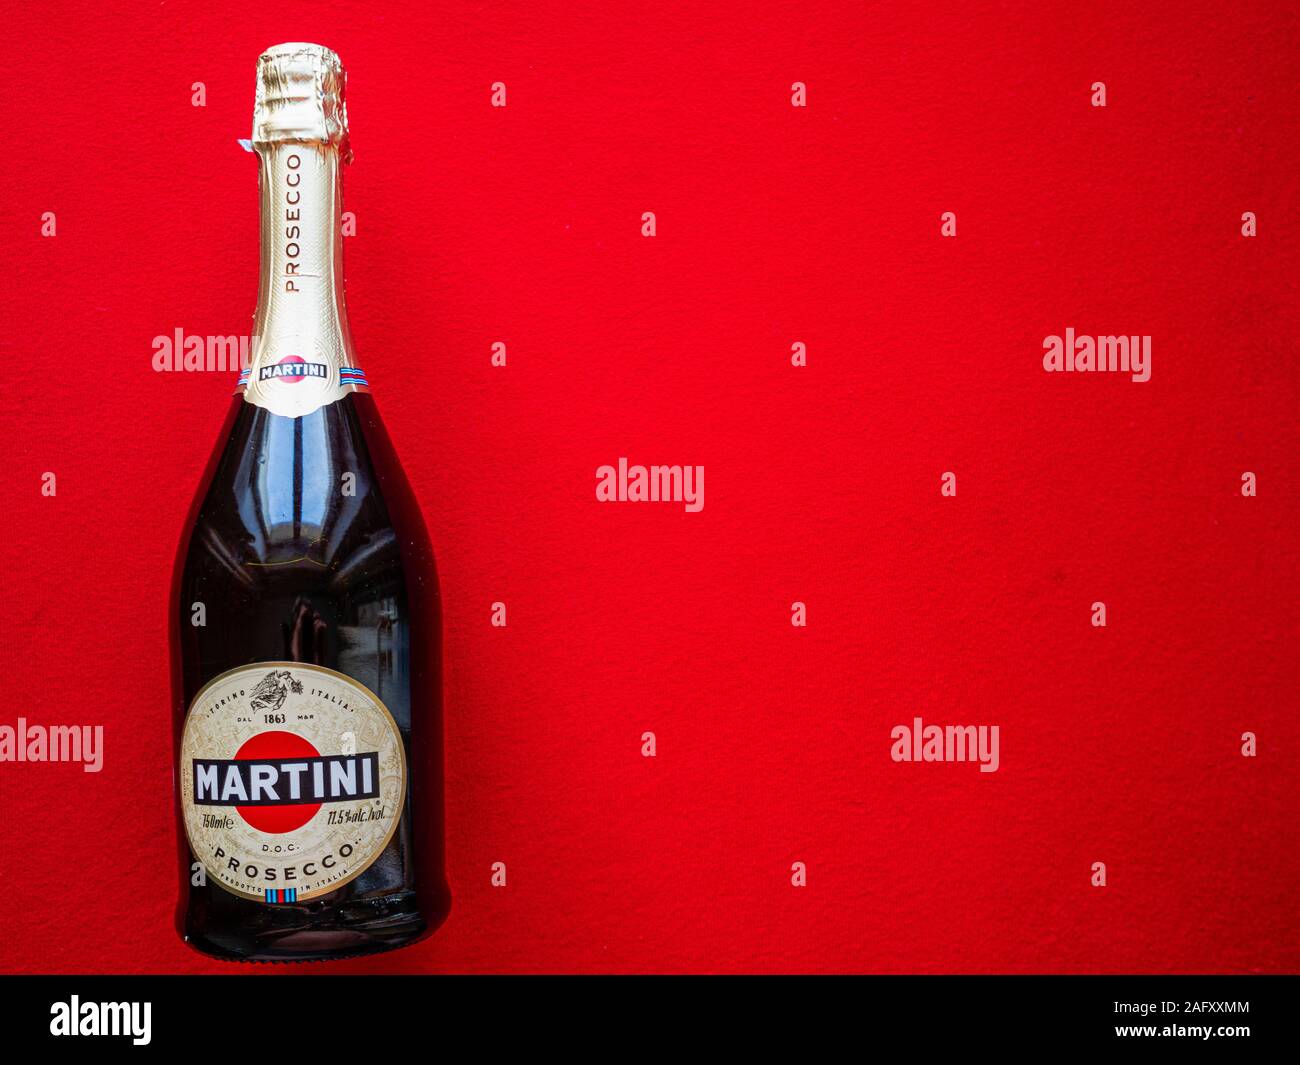 Flat lay close-up of bottle of Martinii Prosecco on a red background Stock Photo